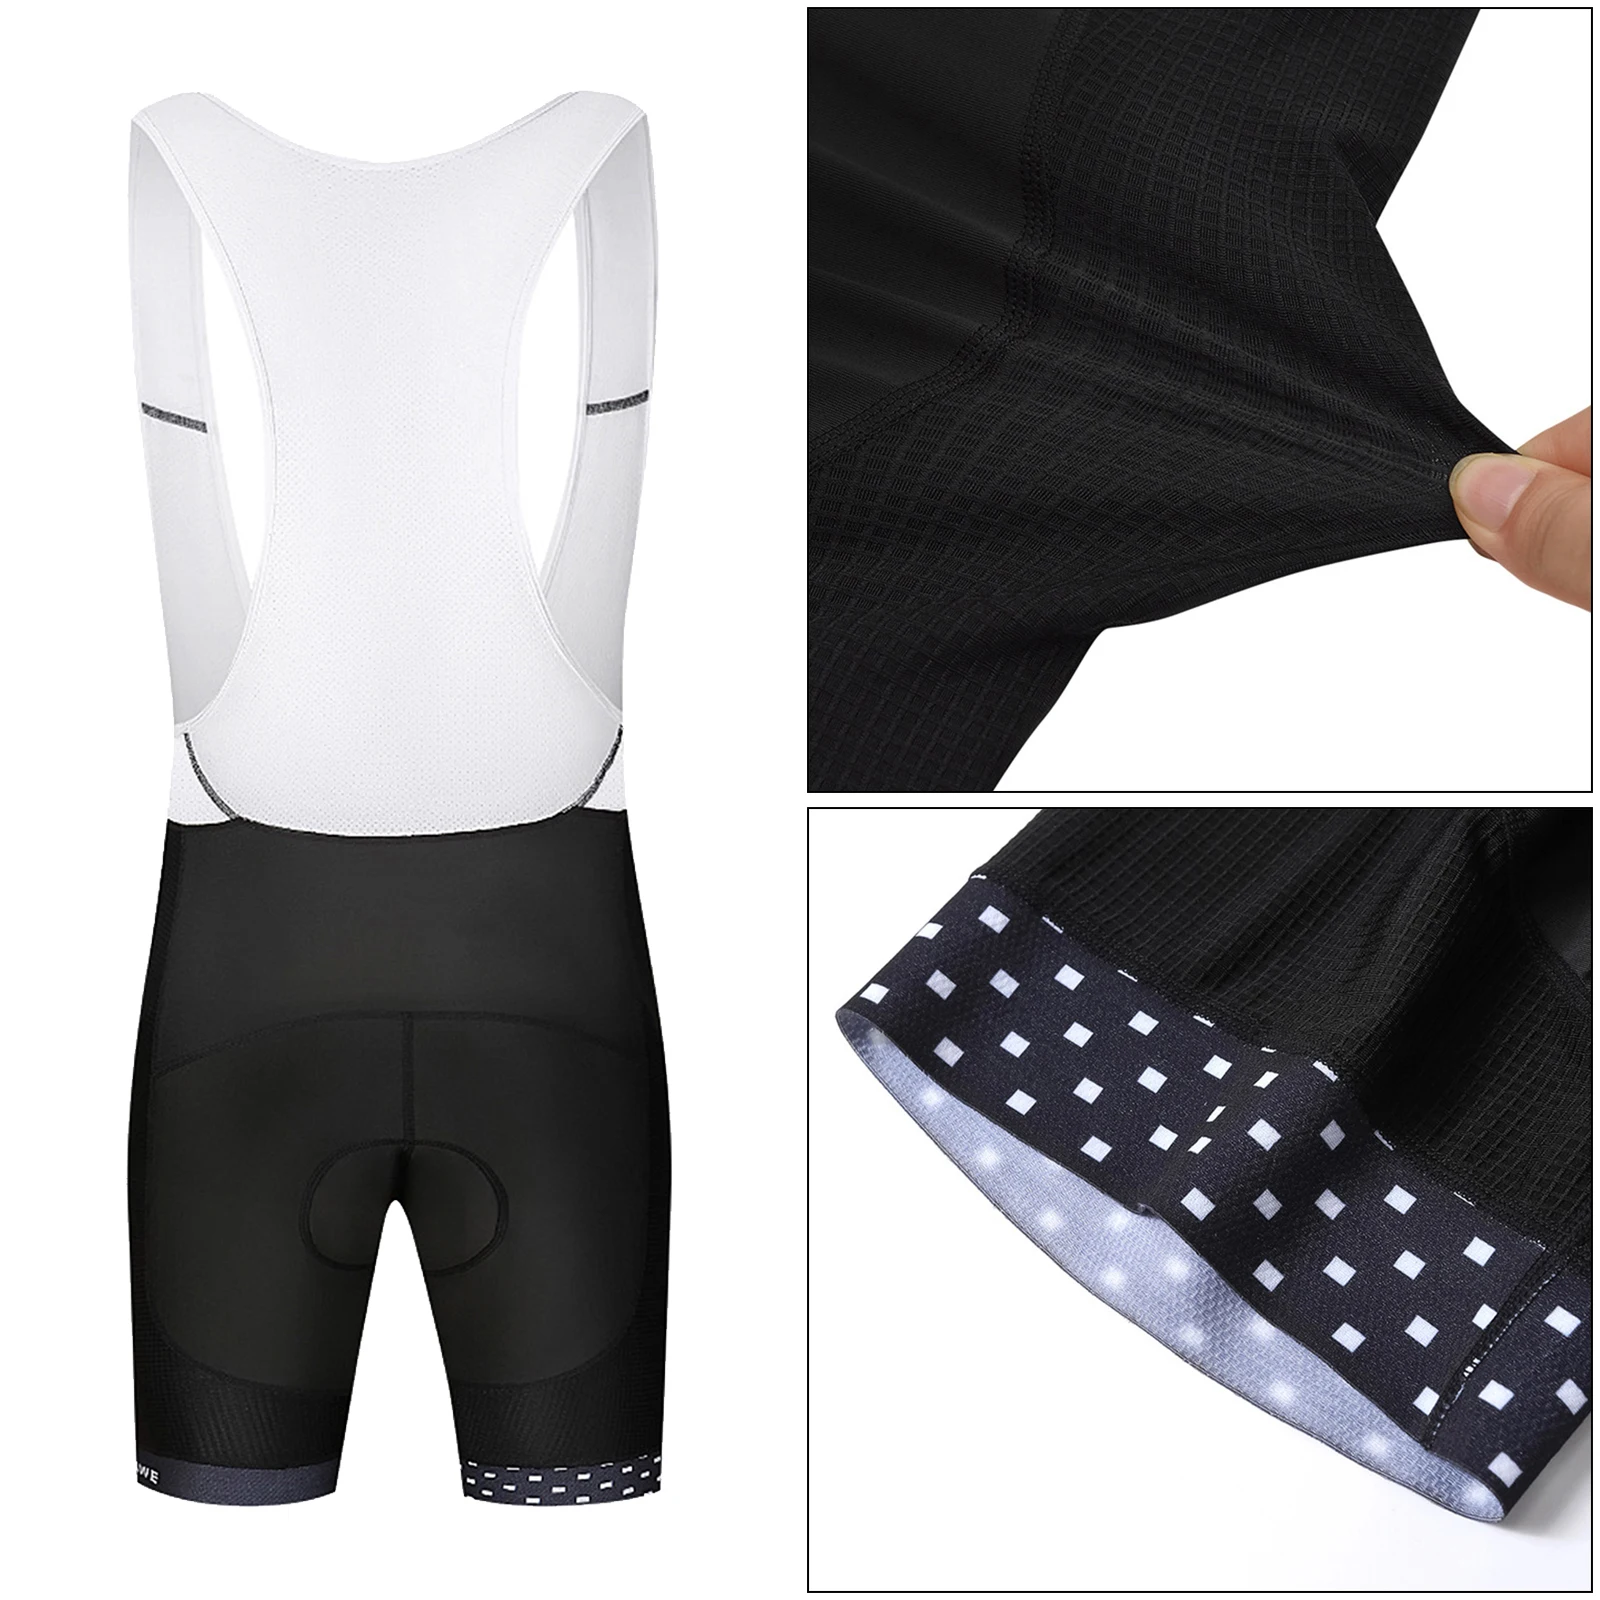 Men Cycling Bib Shorts Bicycle Padded Tights Shorts Mountain Bike Pants Outdoor Sports Shorts Gym Fitness Exercise Gear